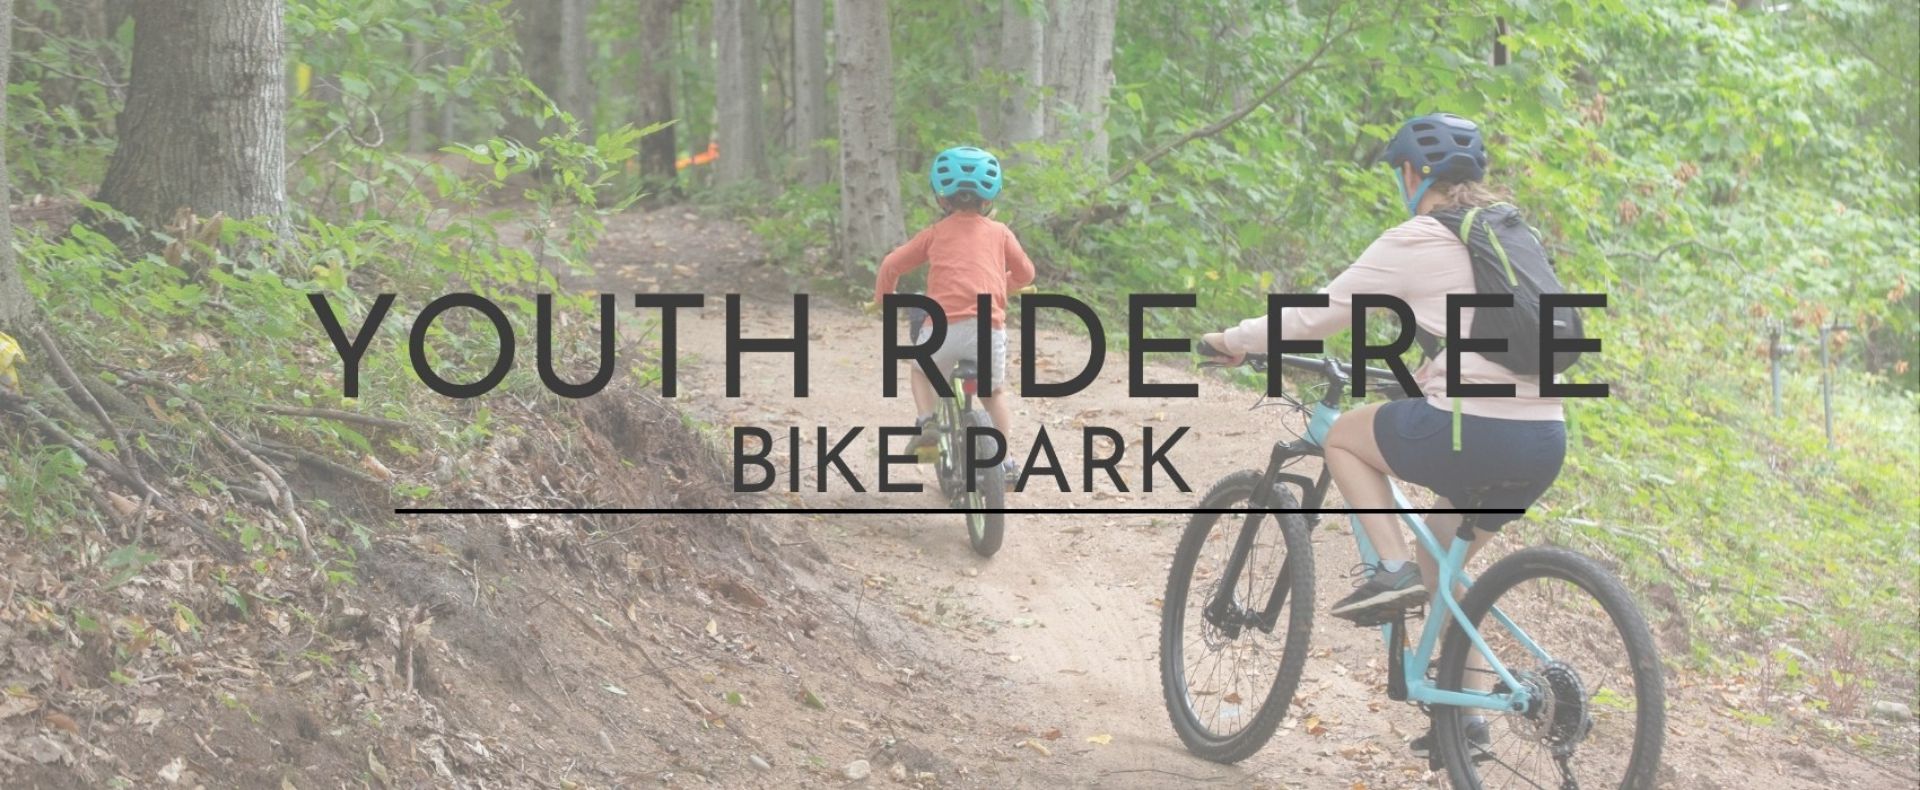 Youth Ride Free on Thursdays at The Highlands Bike Park